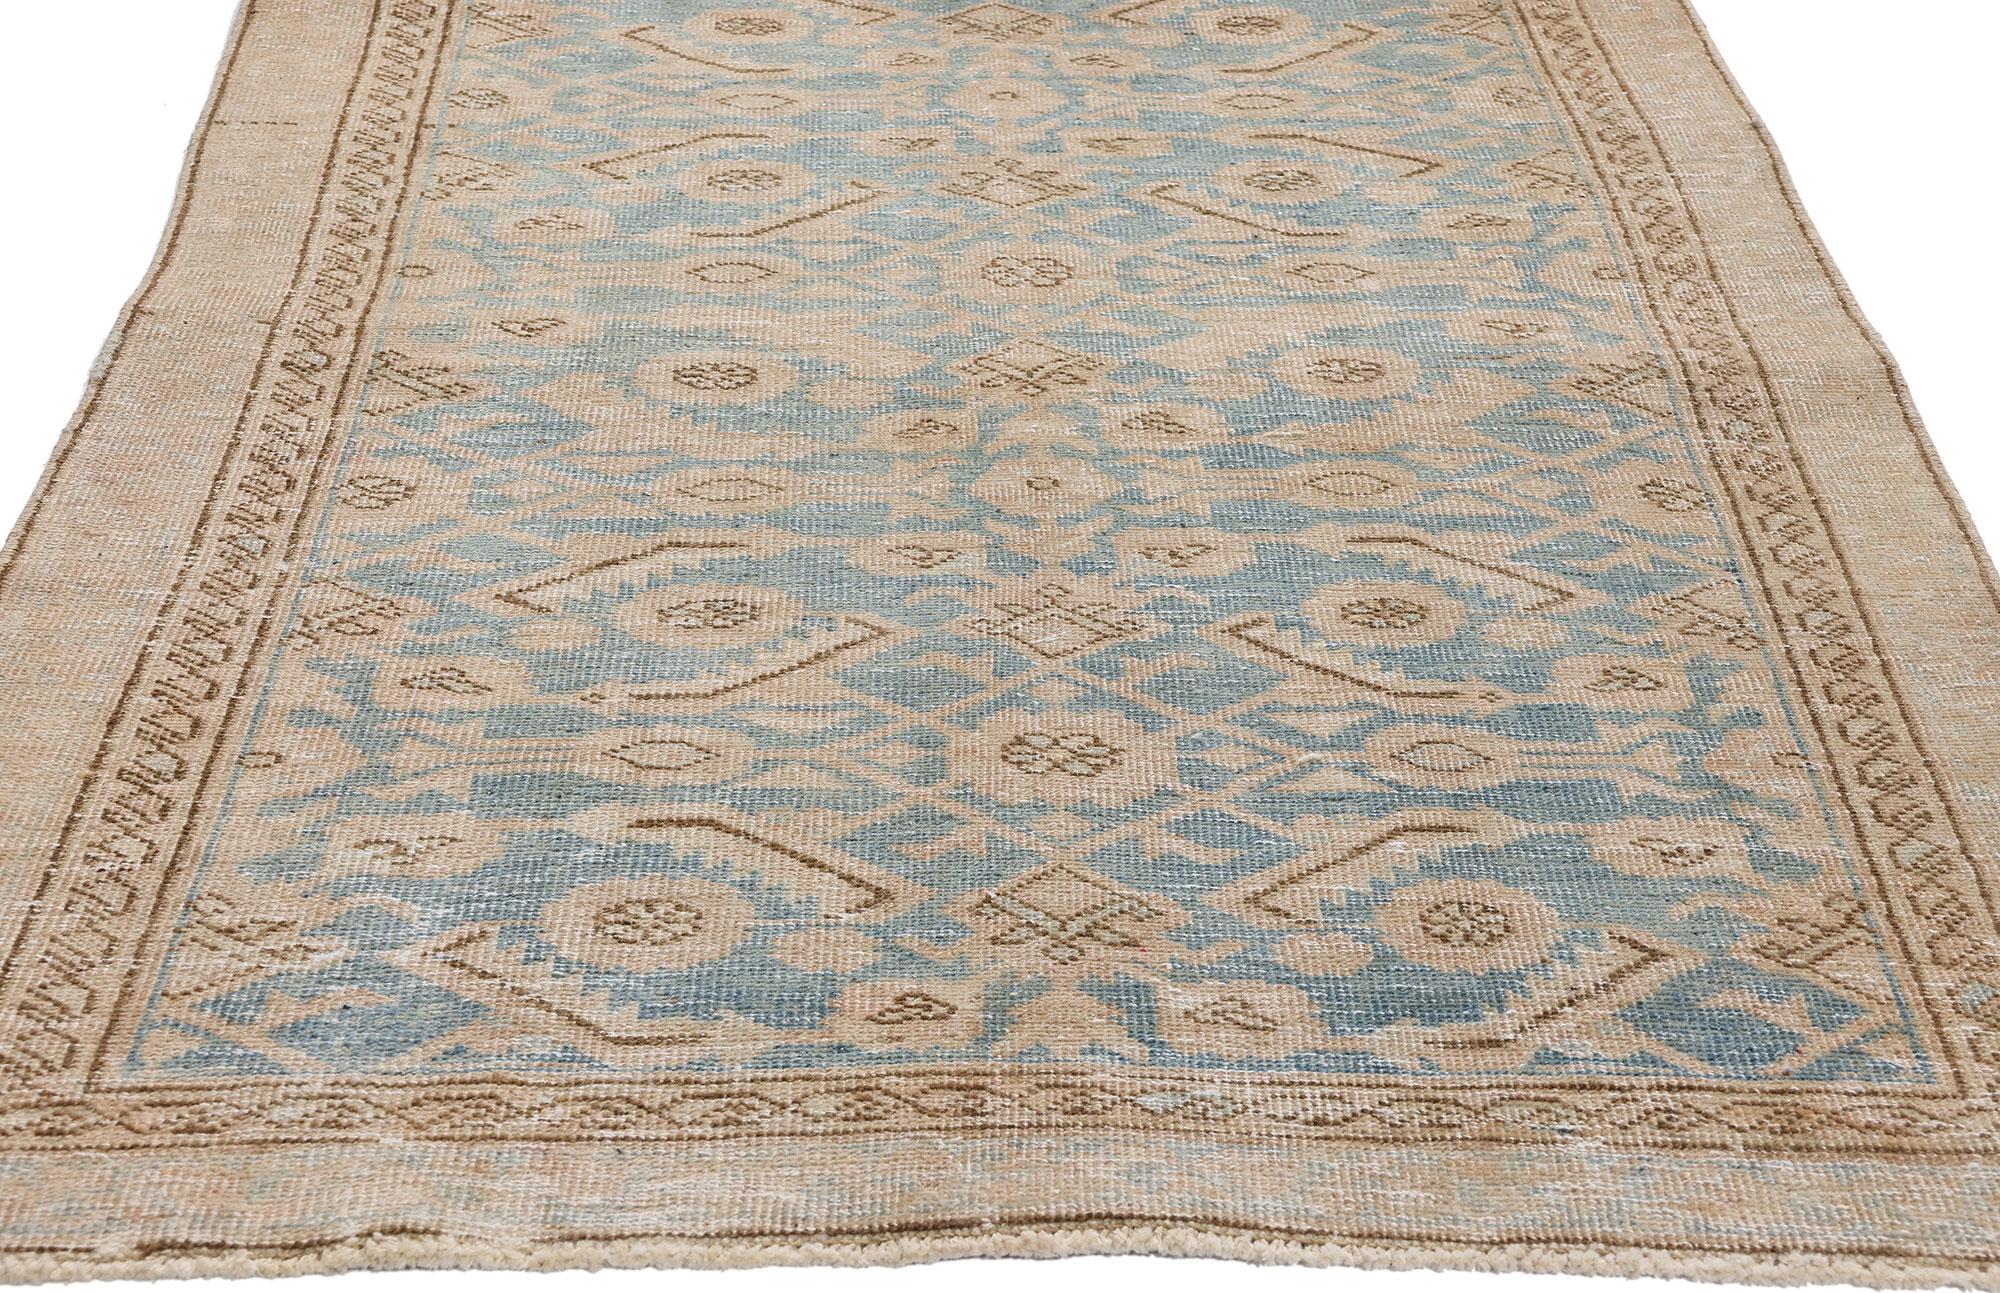 Distressed Vintage Soft Blue Persian Malayer Carpet Runner In Distressed Condition For Sale In Dallas, TX